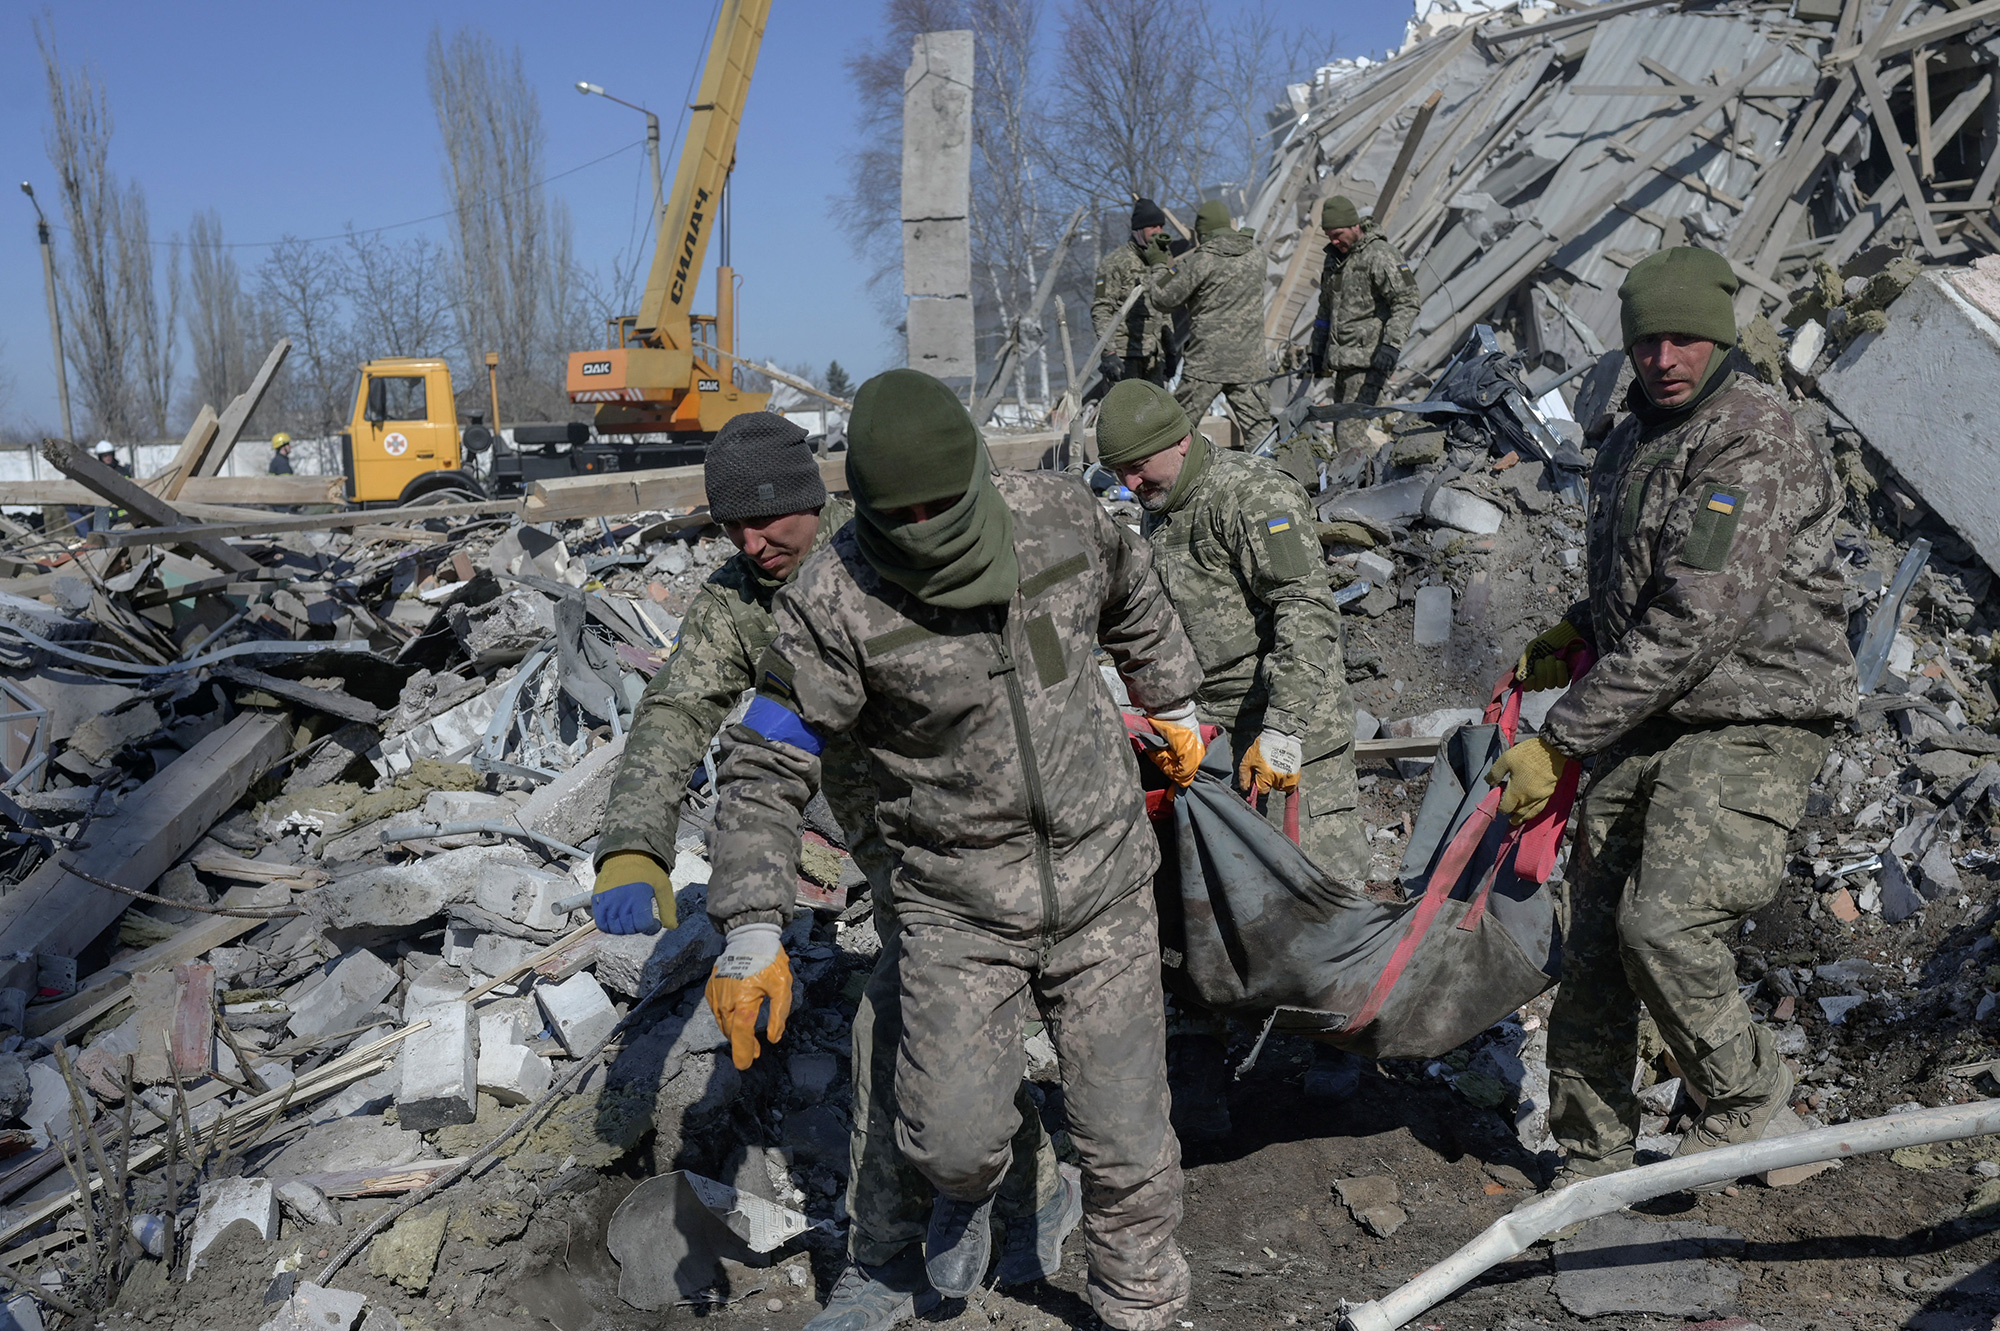 Ukrainian soldiers carry the body of a soldier through debris at the military school hit by Russian rockets the day before, in Mykolaiv, Ukraine, on March 19.